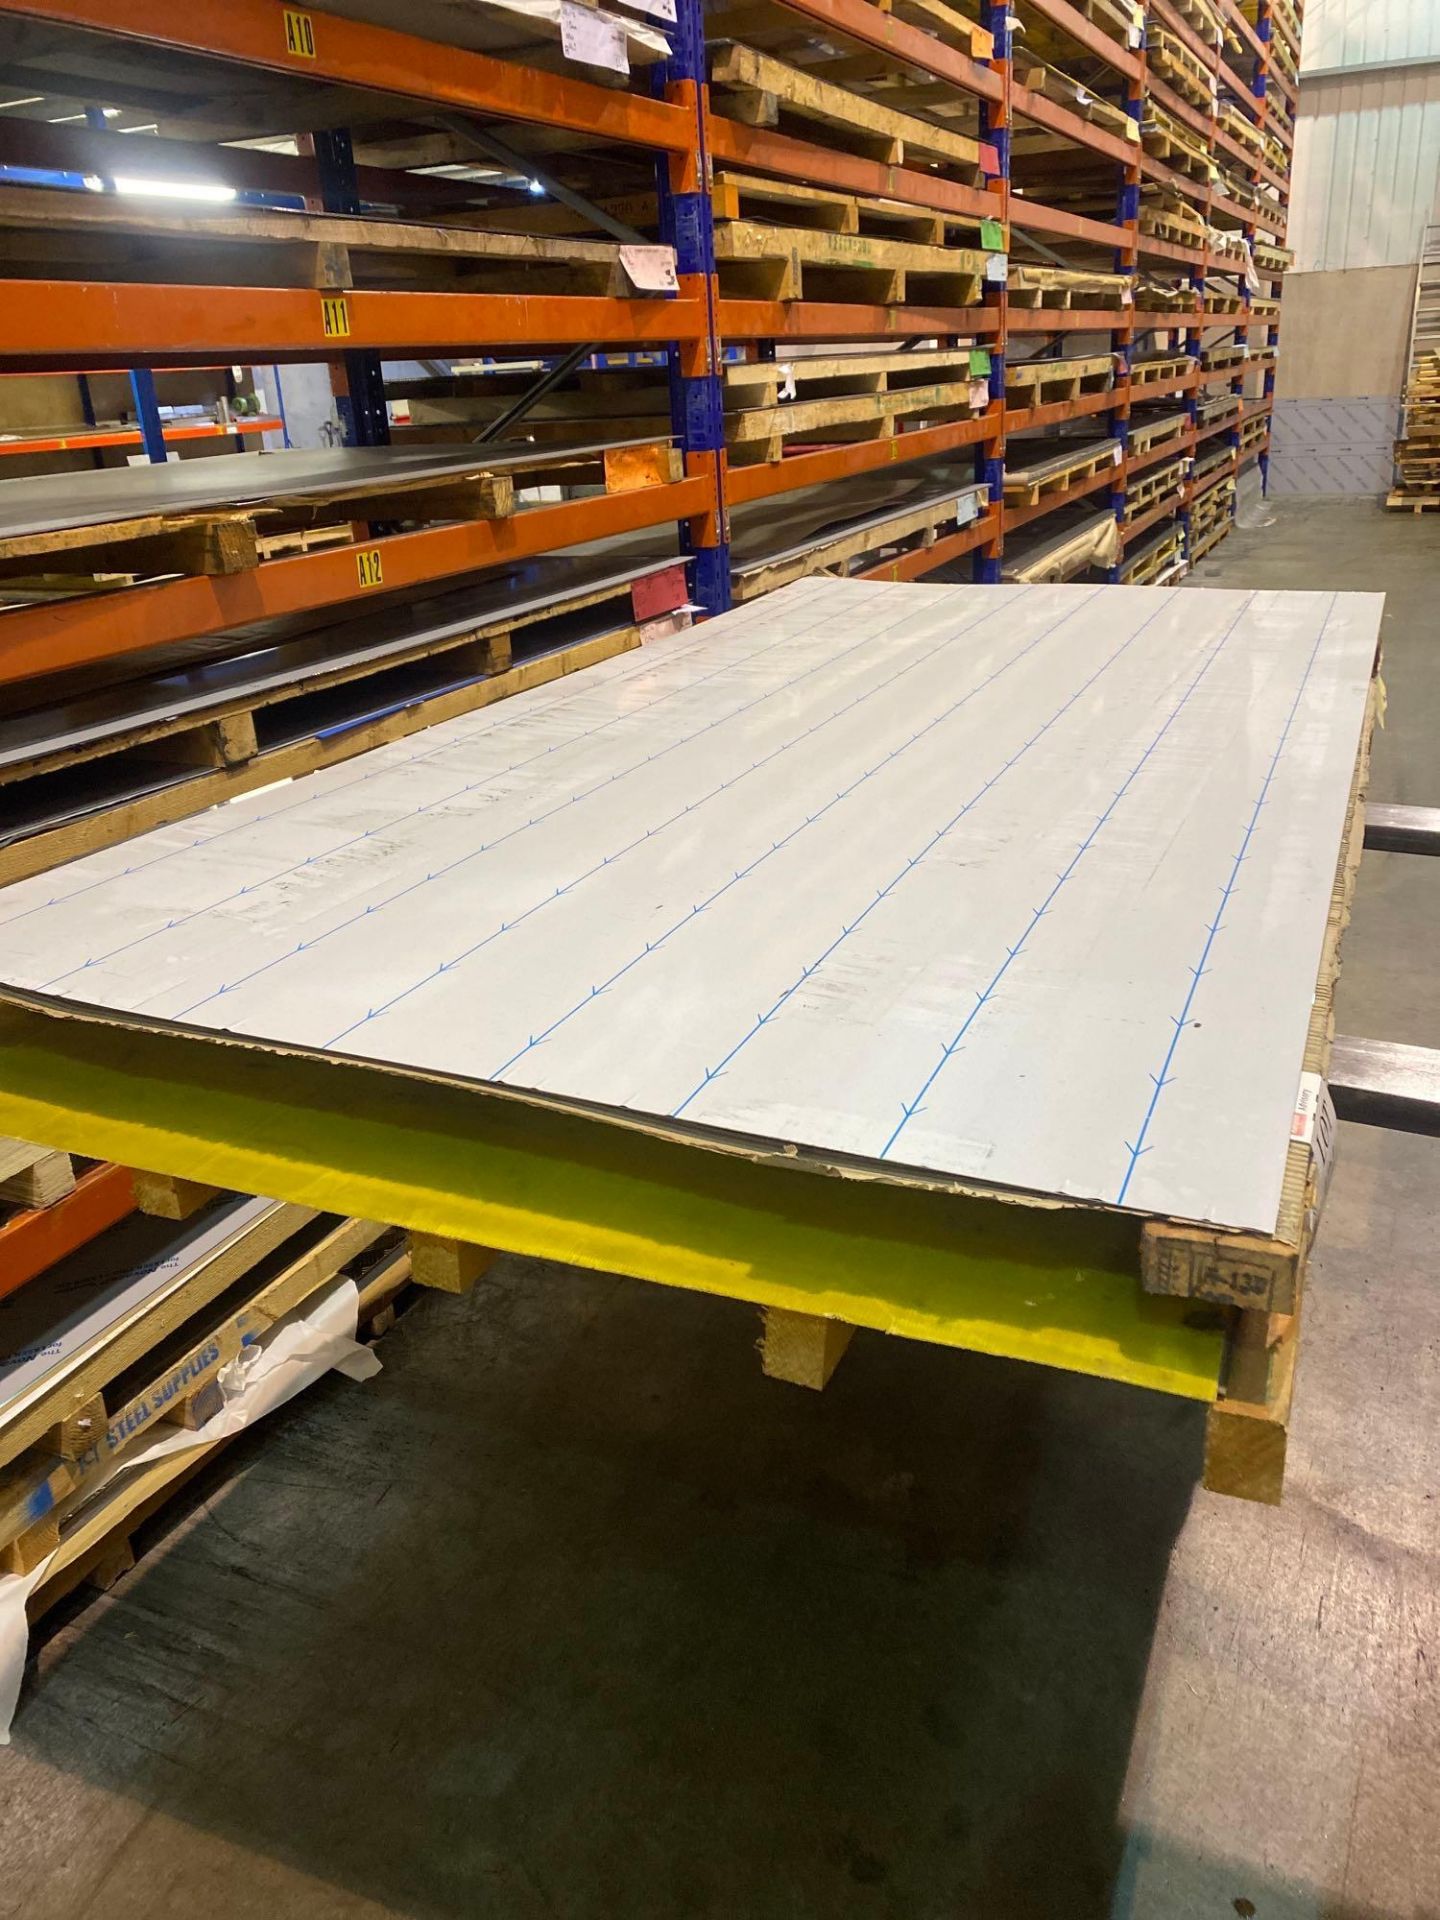 Contents of Rack A2 to include 1 sheet of 304 2B stainless steel 2.5 x 1.25m 5mm thick and 1 sheet